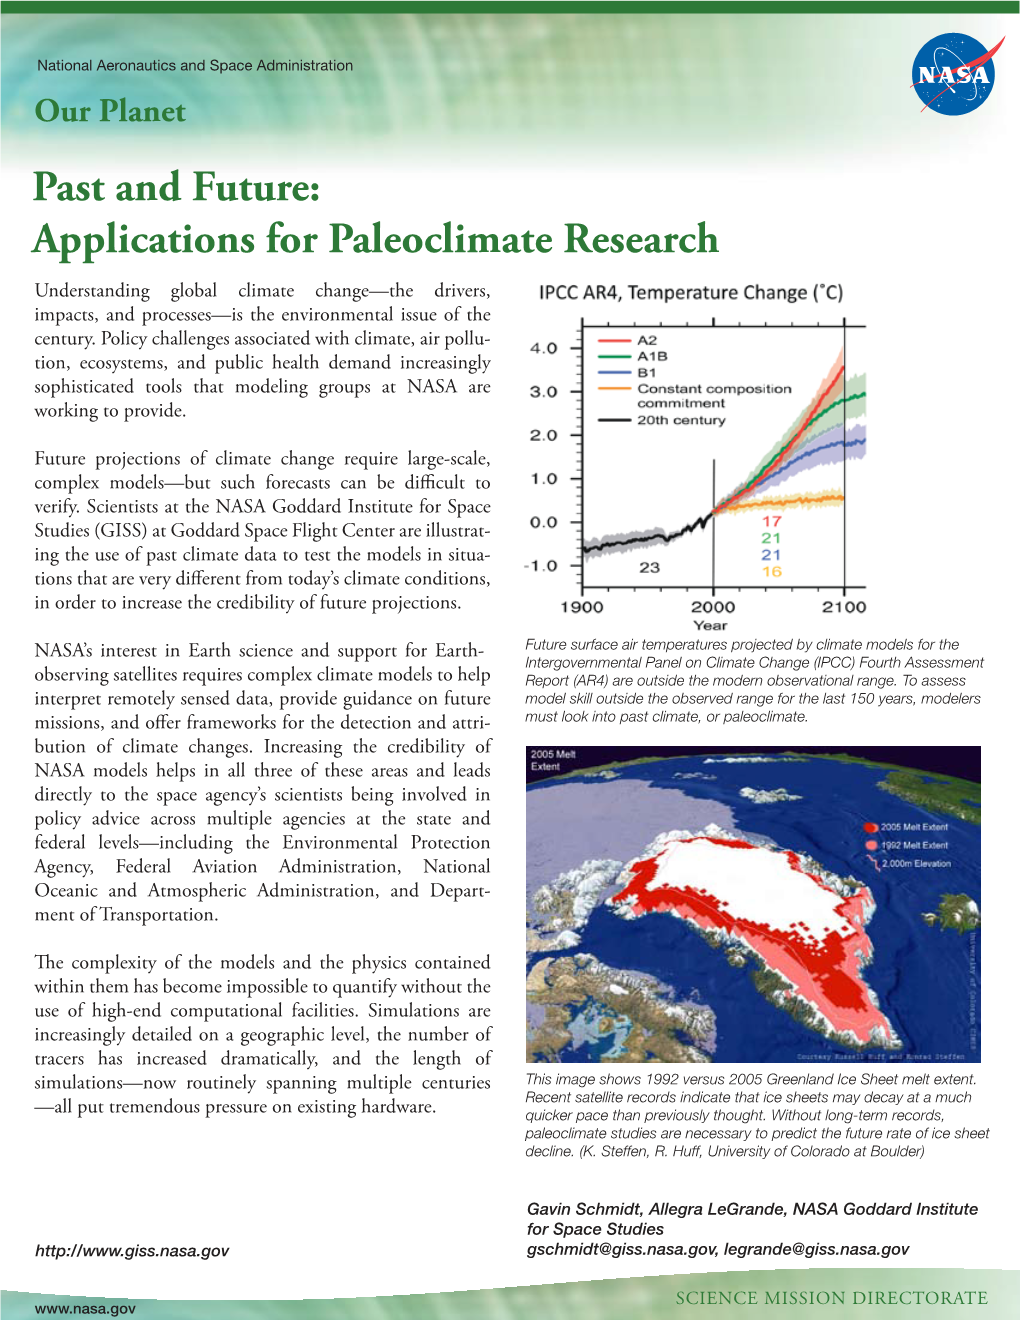 Past and Future: Applications for Paleoclimate Research